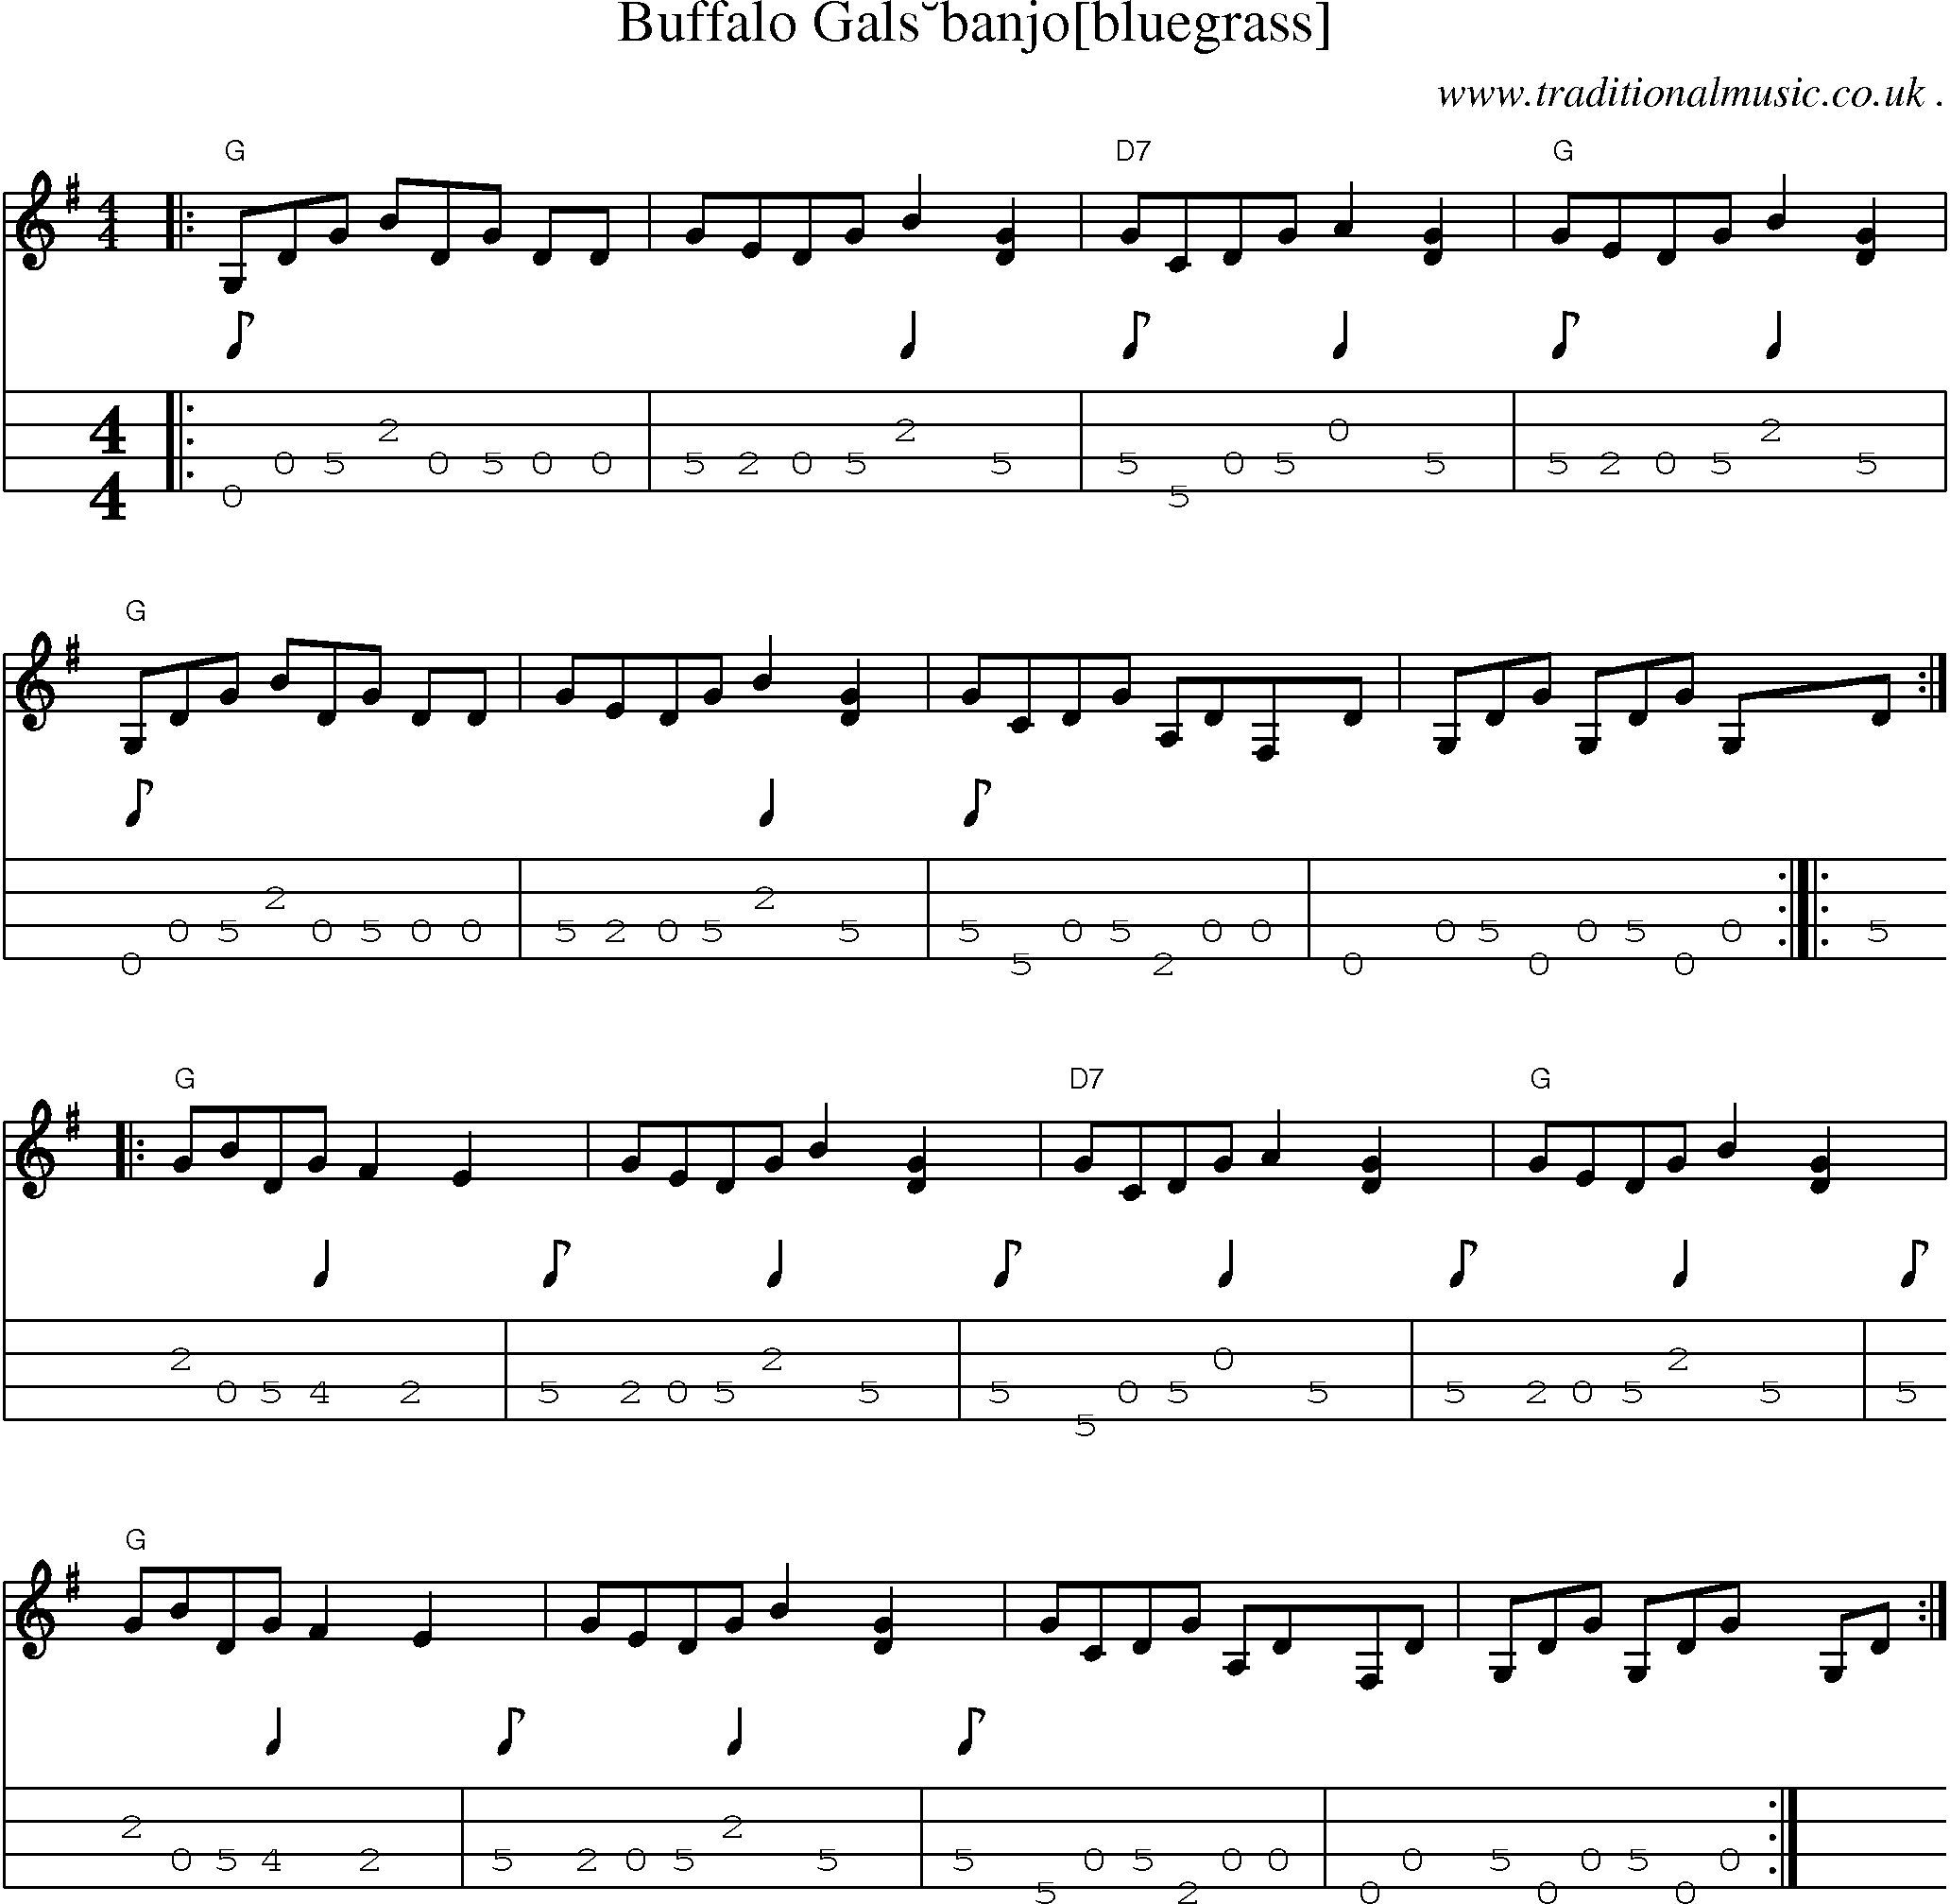 Music Score and Guitar Tabs for Buffalo Gals banjo bg